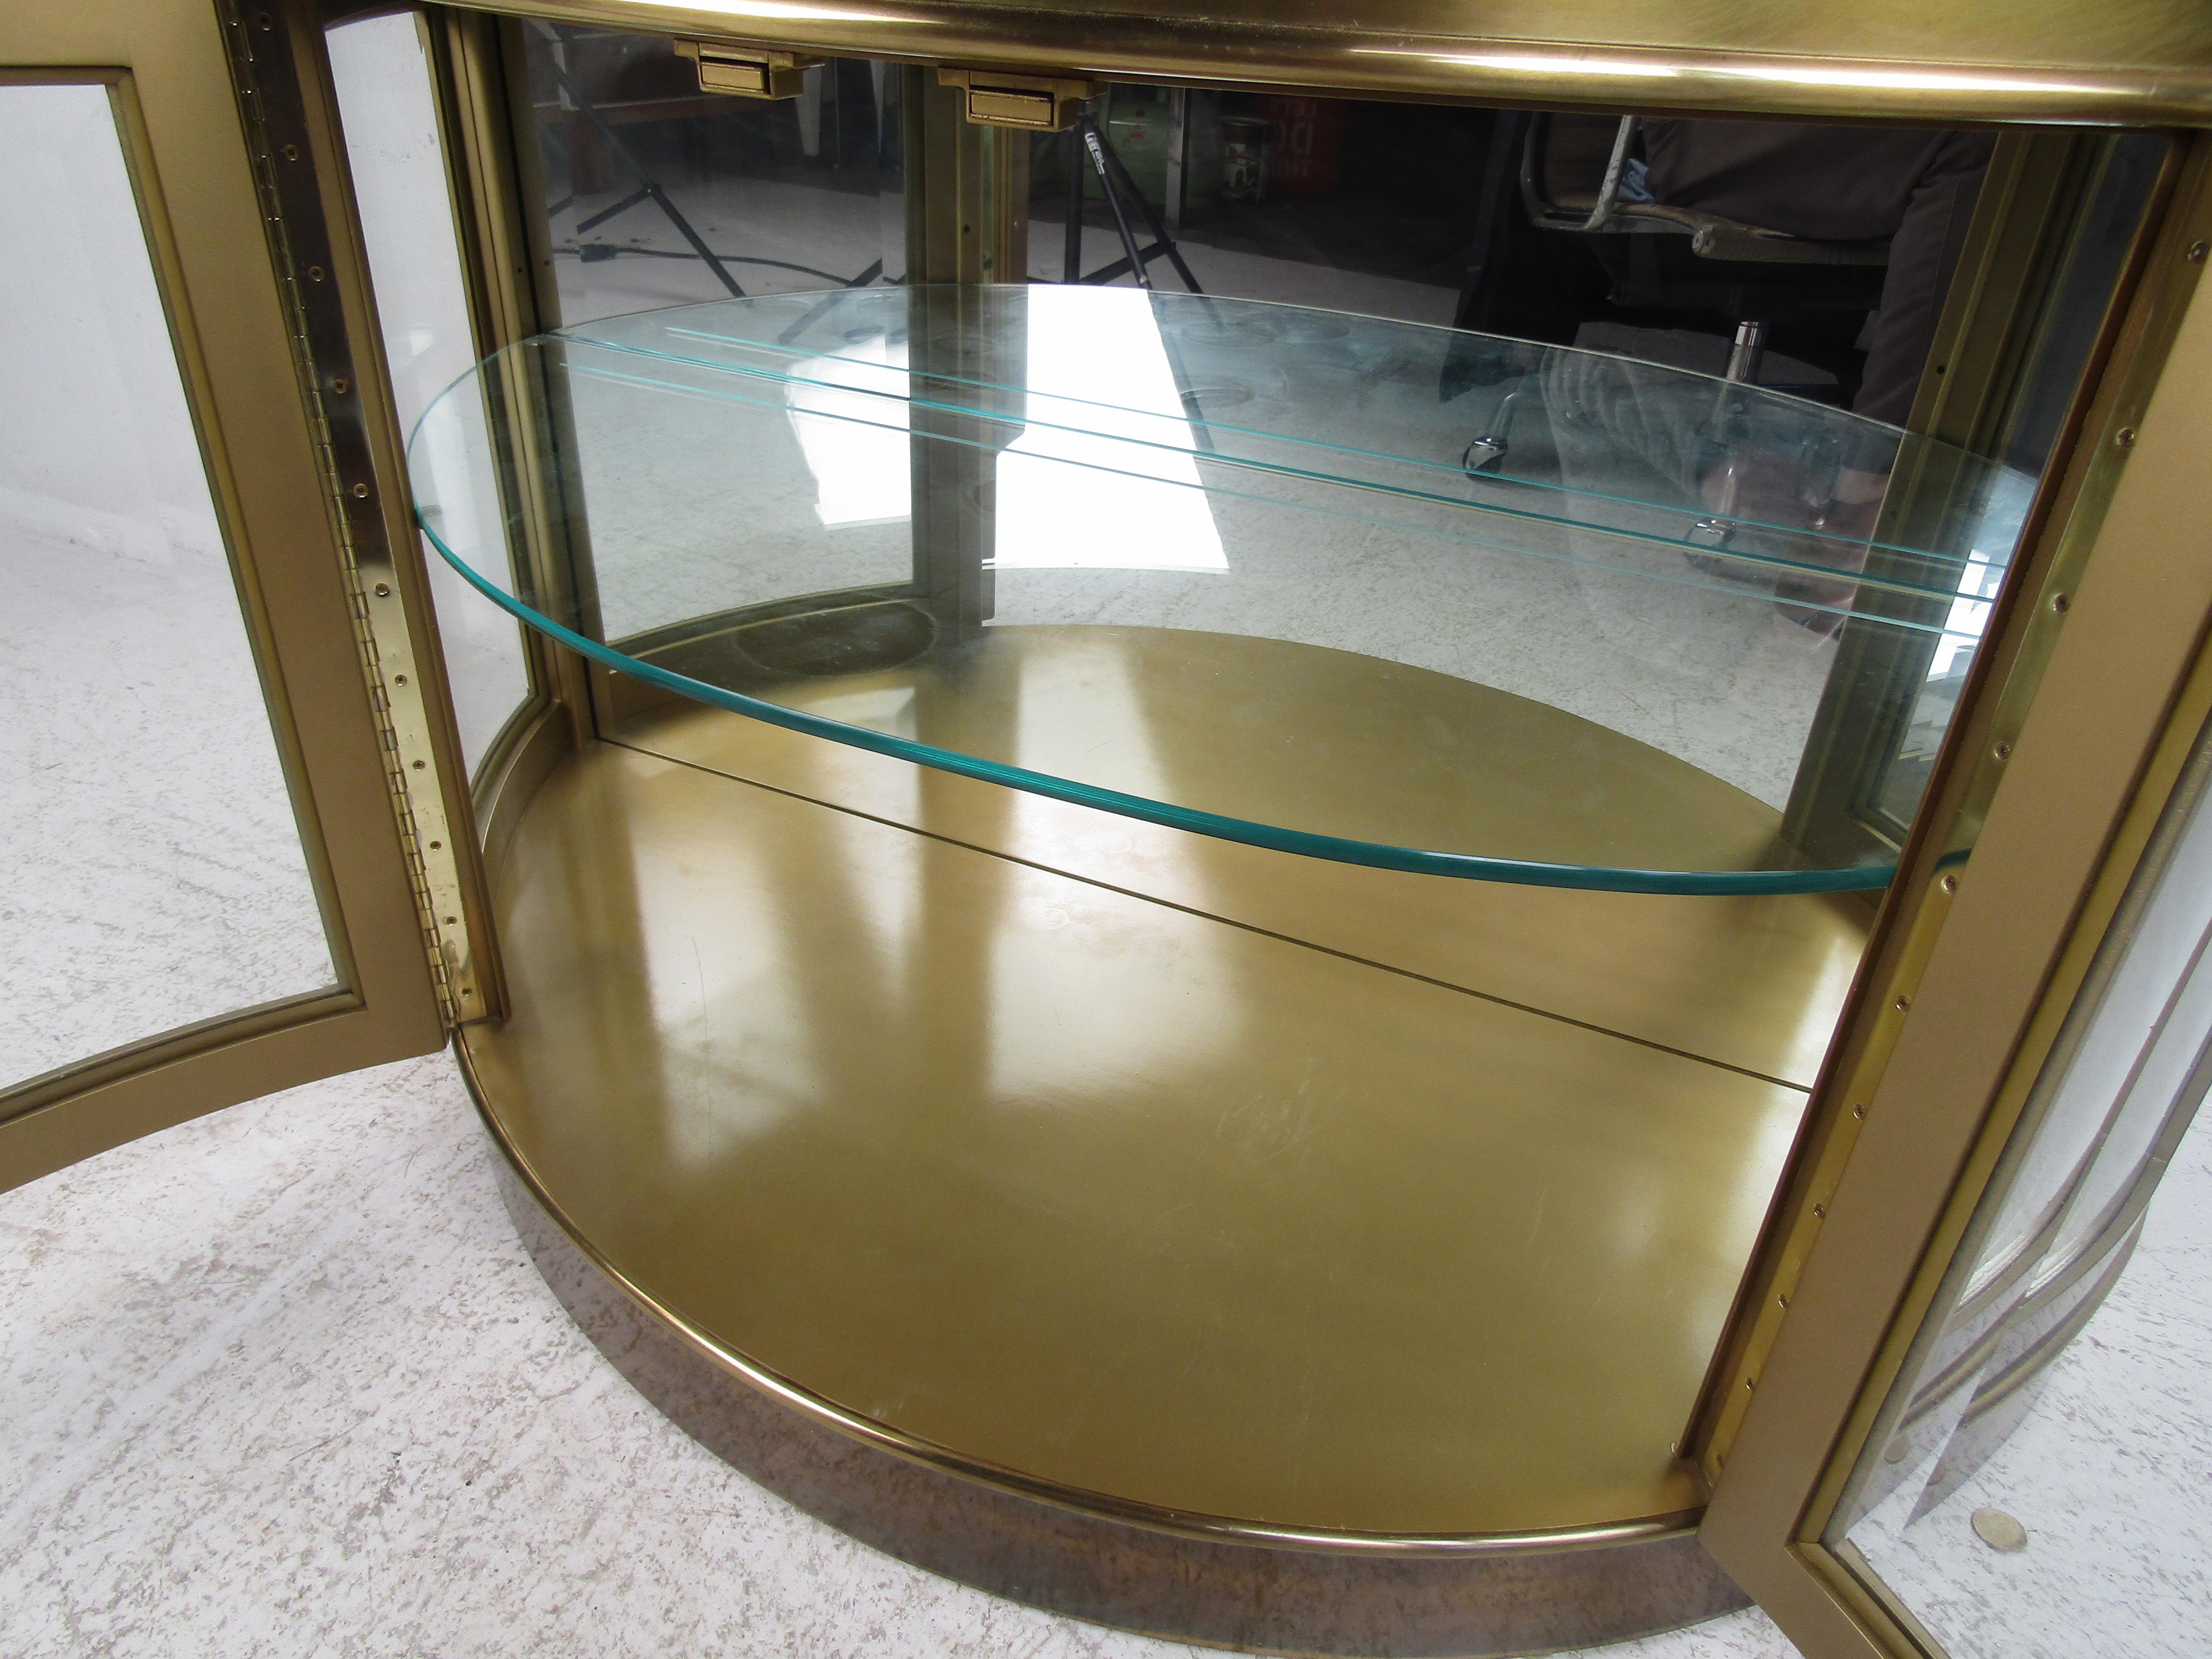 Late 20th Century Mid-Century Modern Demilune Display Cabinet by Mastercraft